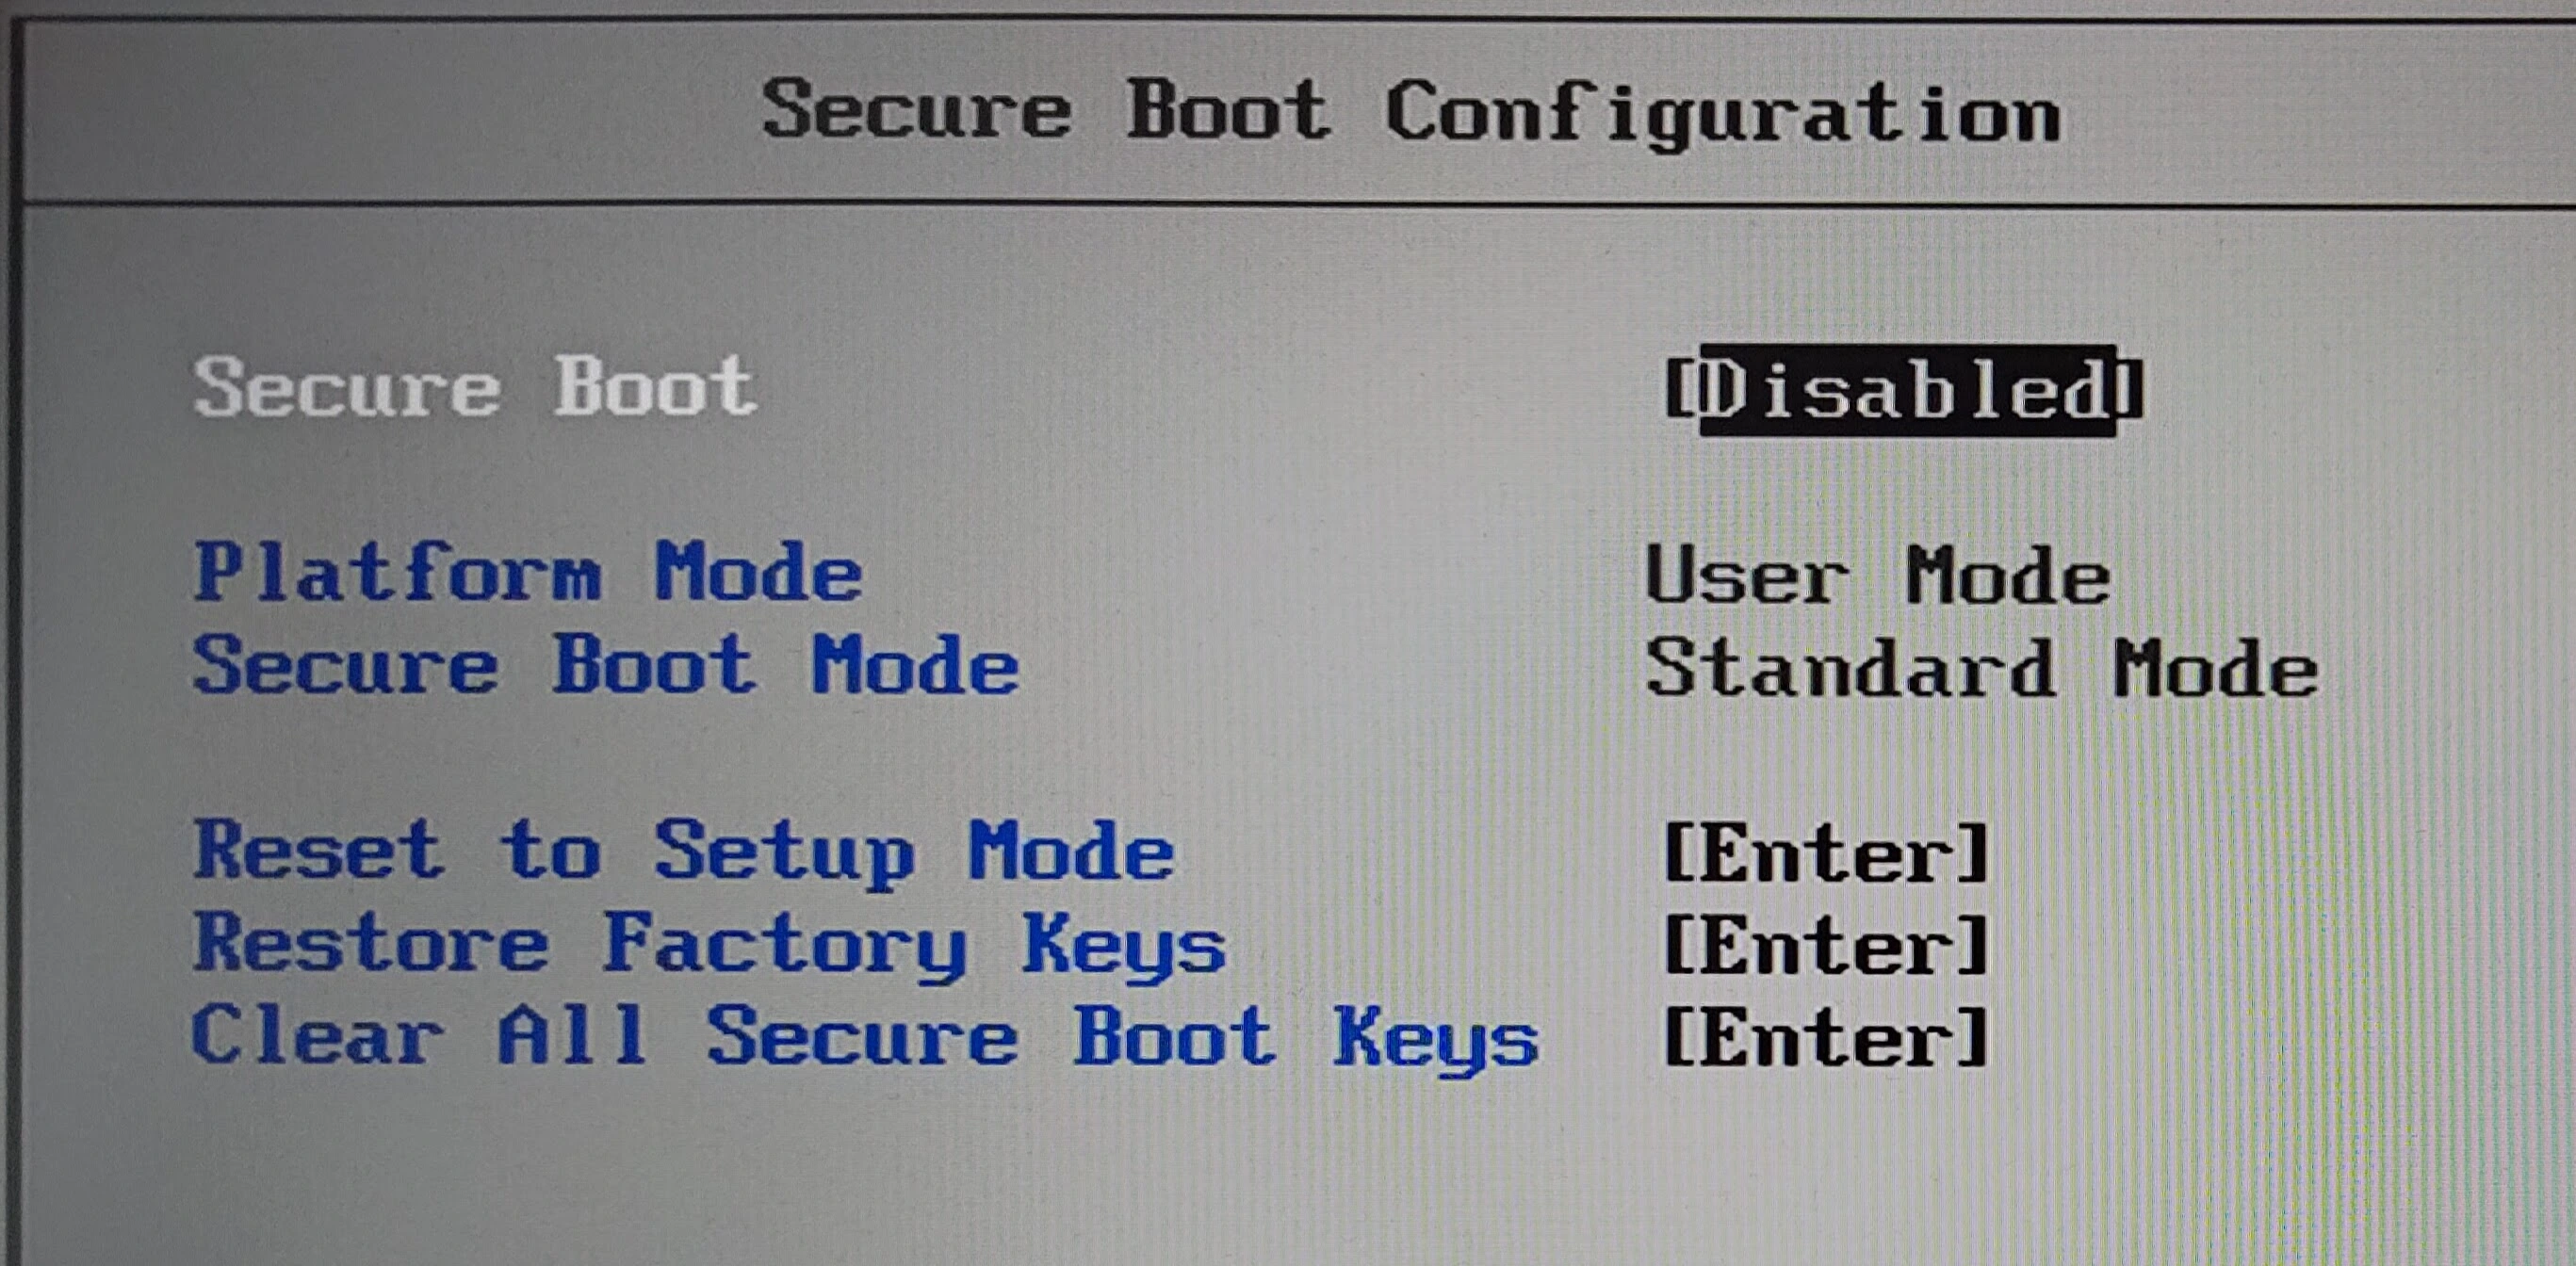 Secure Boot Configuration in the Lenovo Thinkpad T480s BIOS